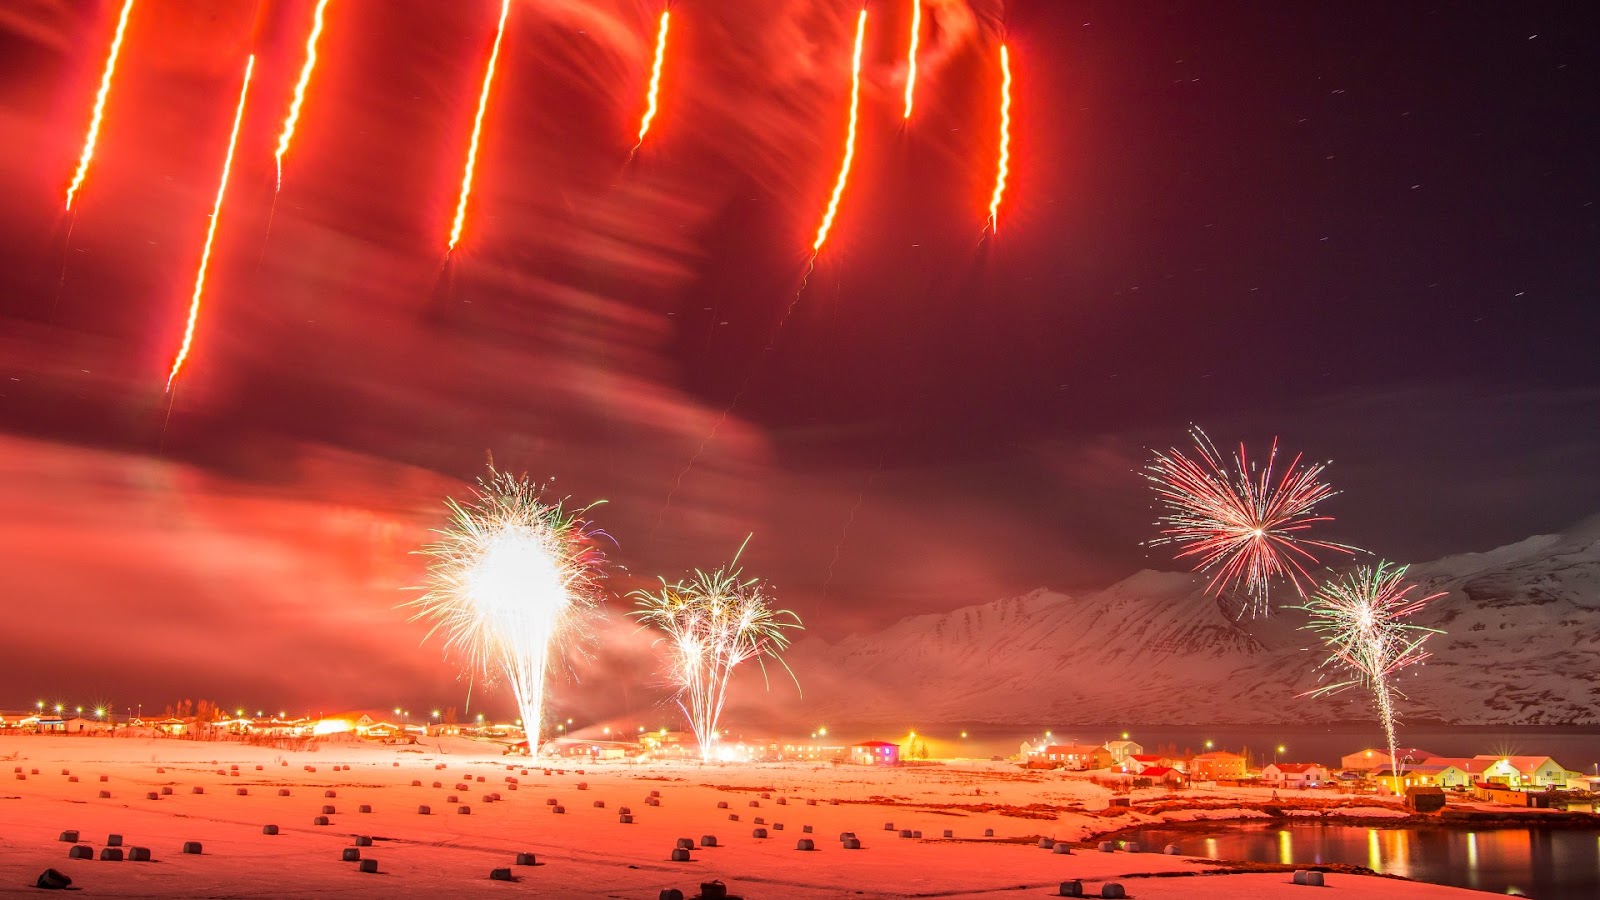 New Year’s fireworks over the town of Hauganes in Iceland